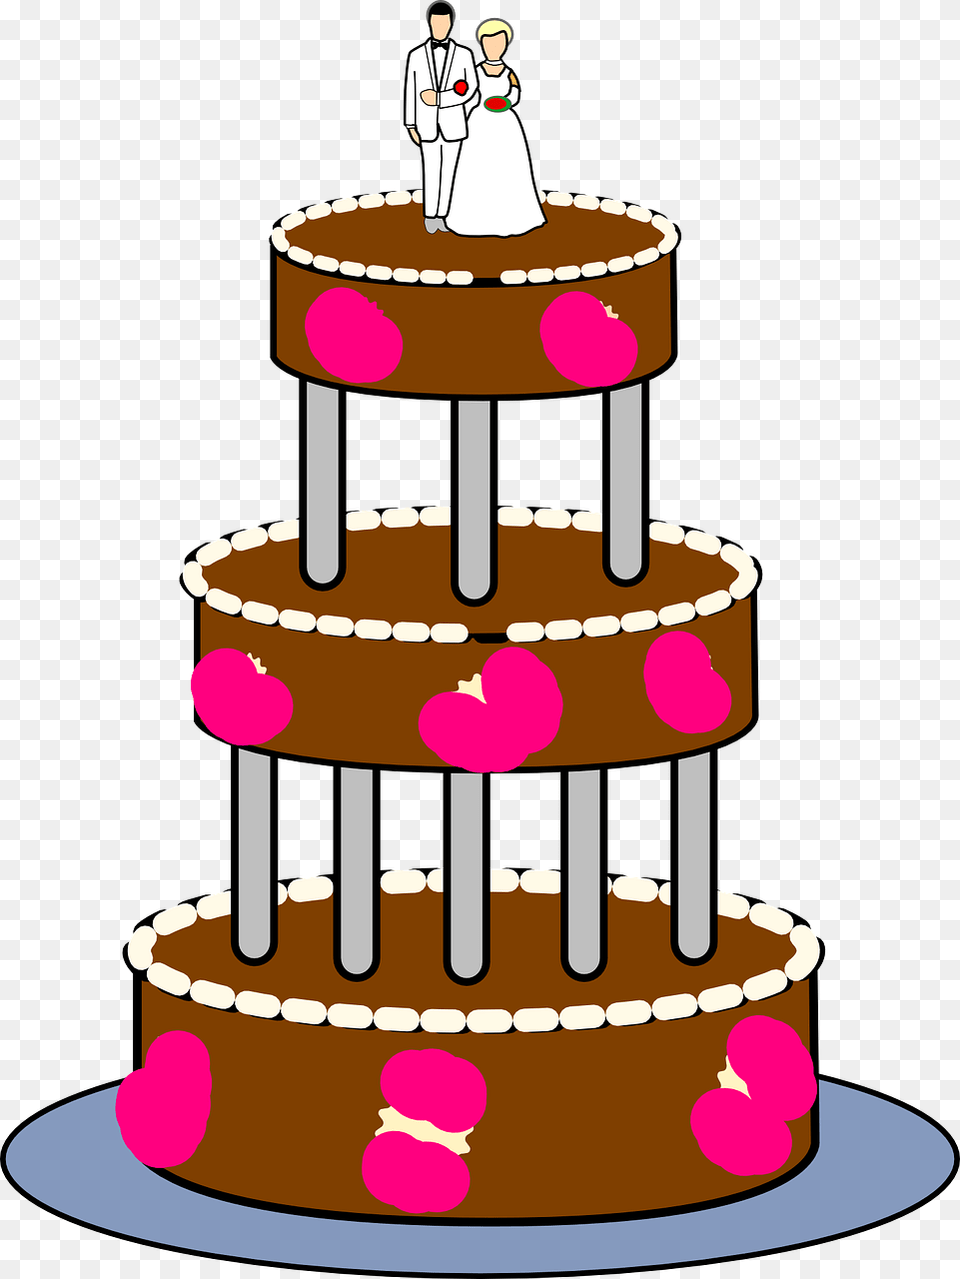 Wedding Cake Tiered Layers Topper Columns Frosting Wedding Cake Graphic, Dessert, Food, Birthday Cake, Cream Free Transparent Png